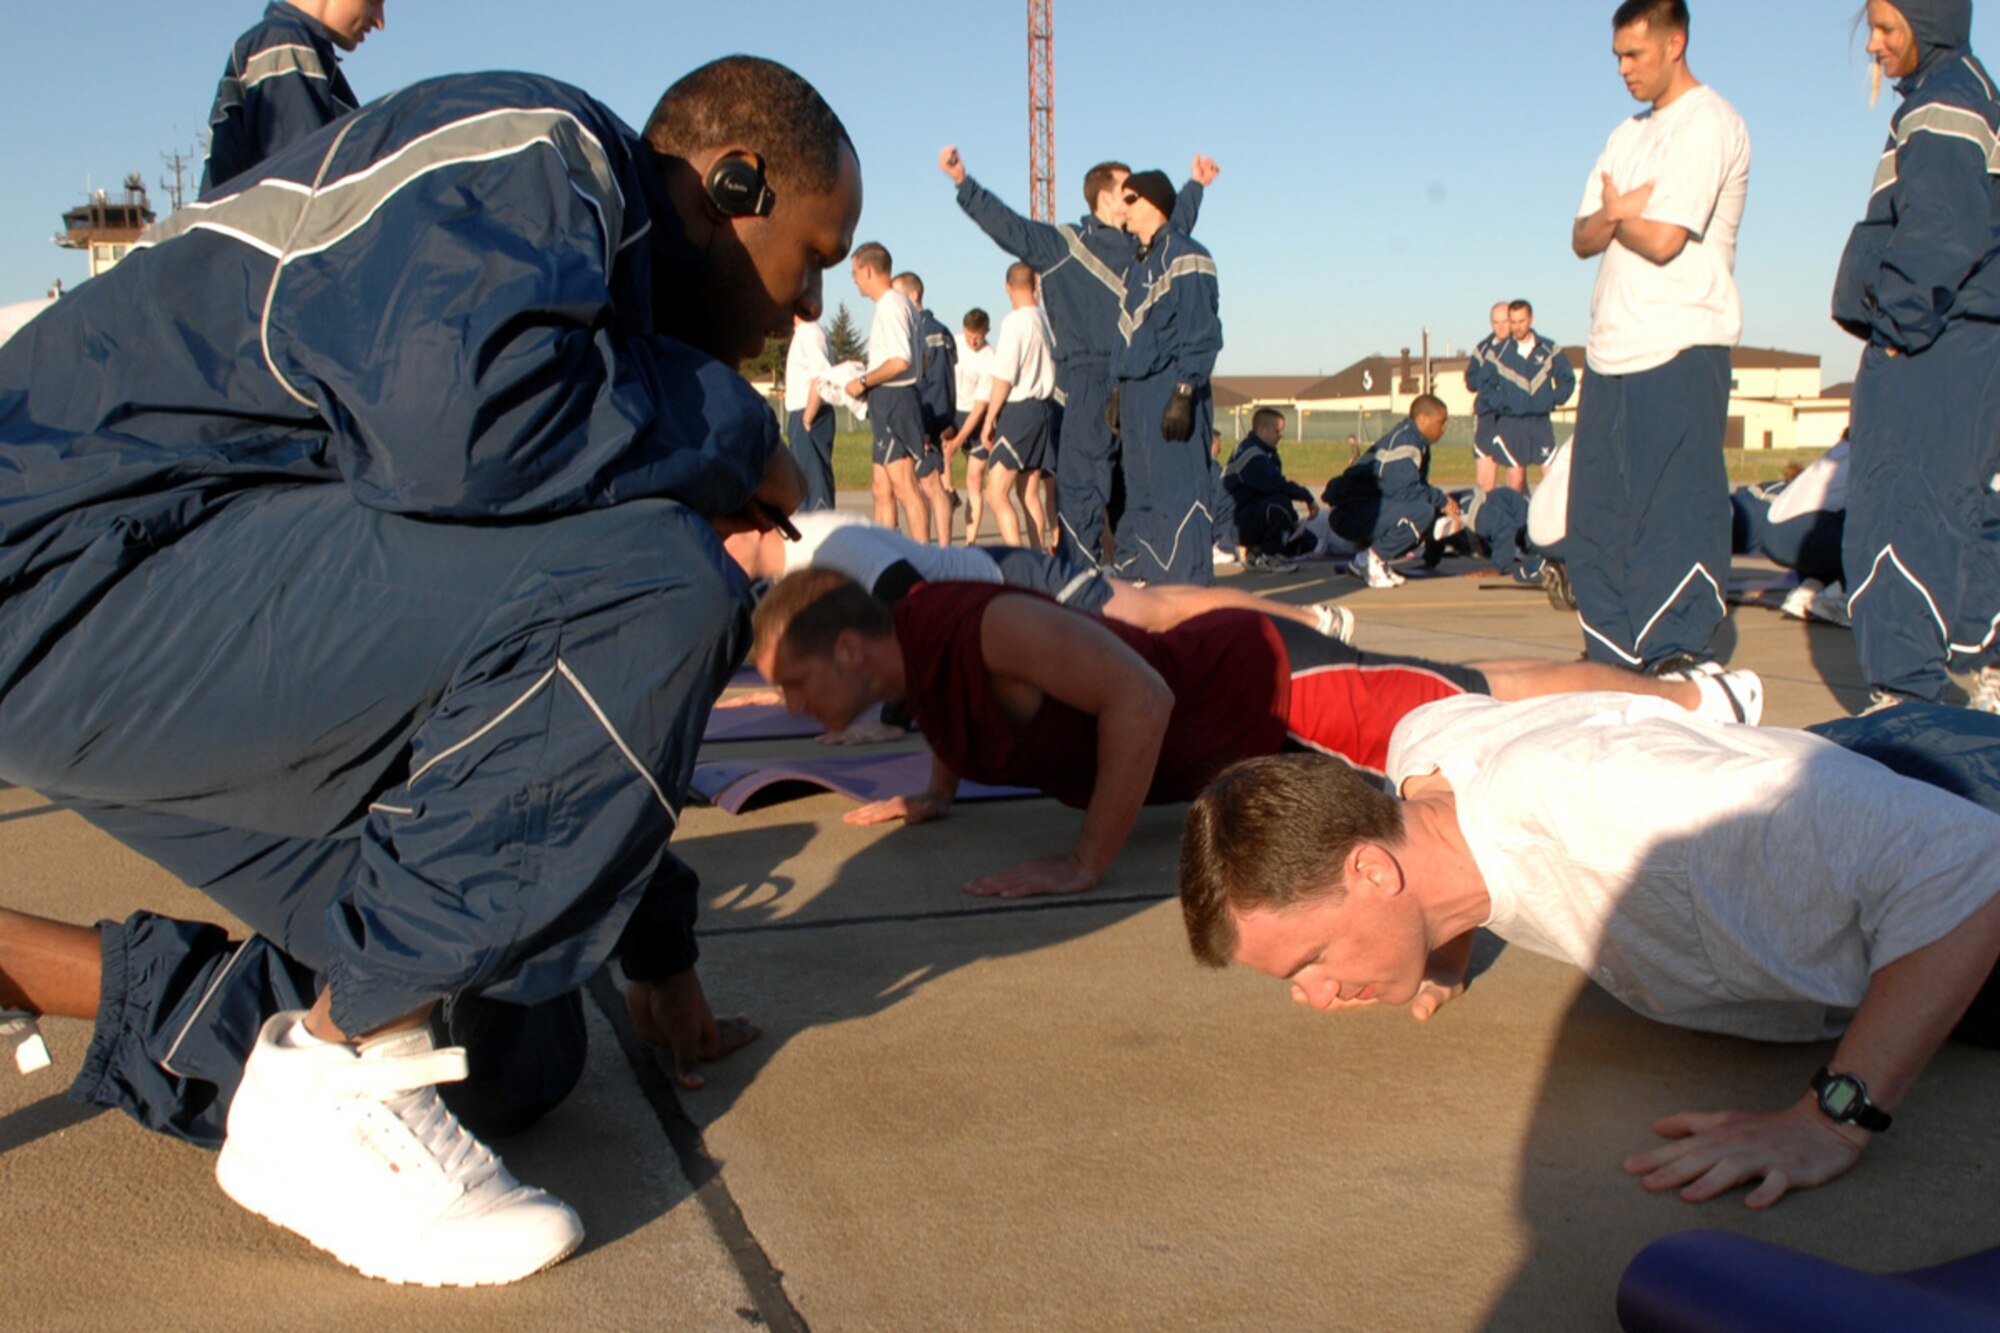 SPANGDAHLEM AIR BASE, GERMANY -- More than 70 Airmen stepped up to accept the 52nd Fighter Wing commander’s physical fitness challenge in the hope of receiving a three day weekend during a wing fun run on the Spangdahlem Air Base flight line May 1. (US Air Force photo/Senior Airman Josie Kemp)